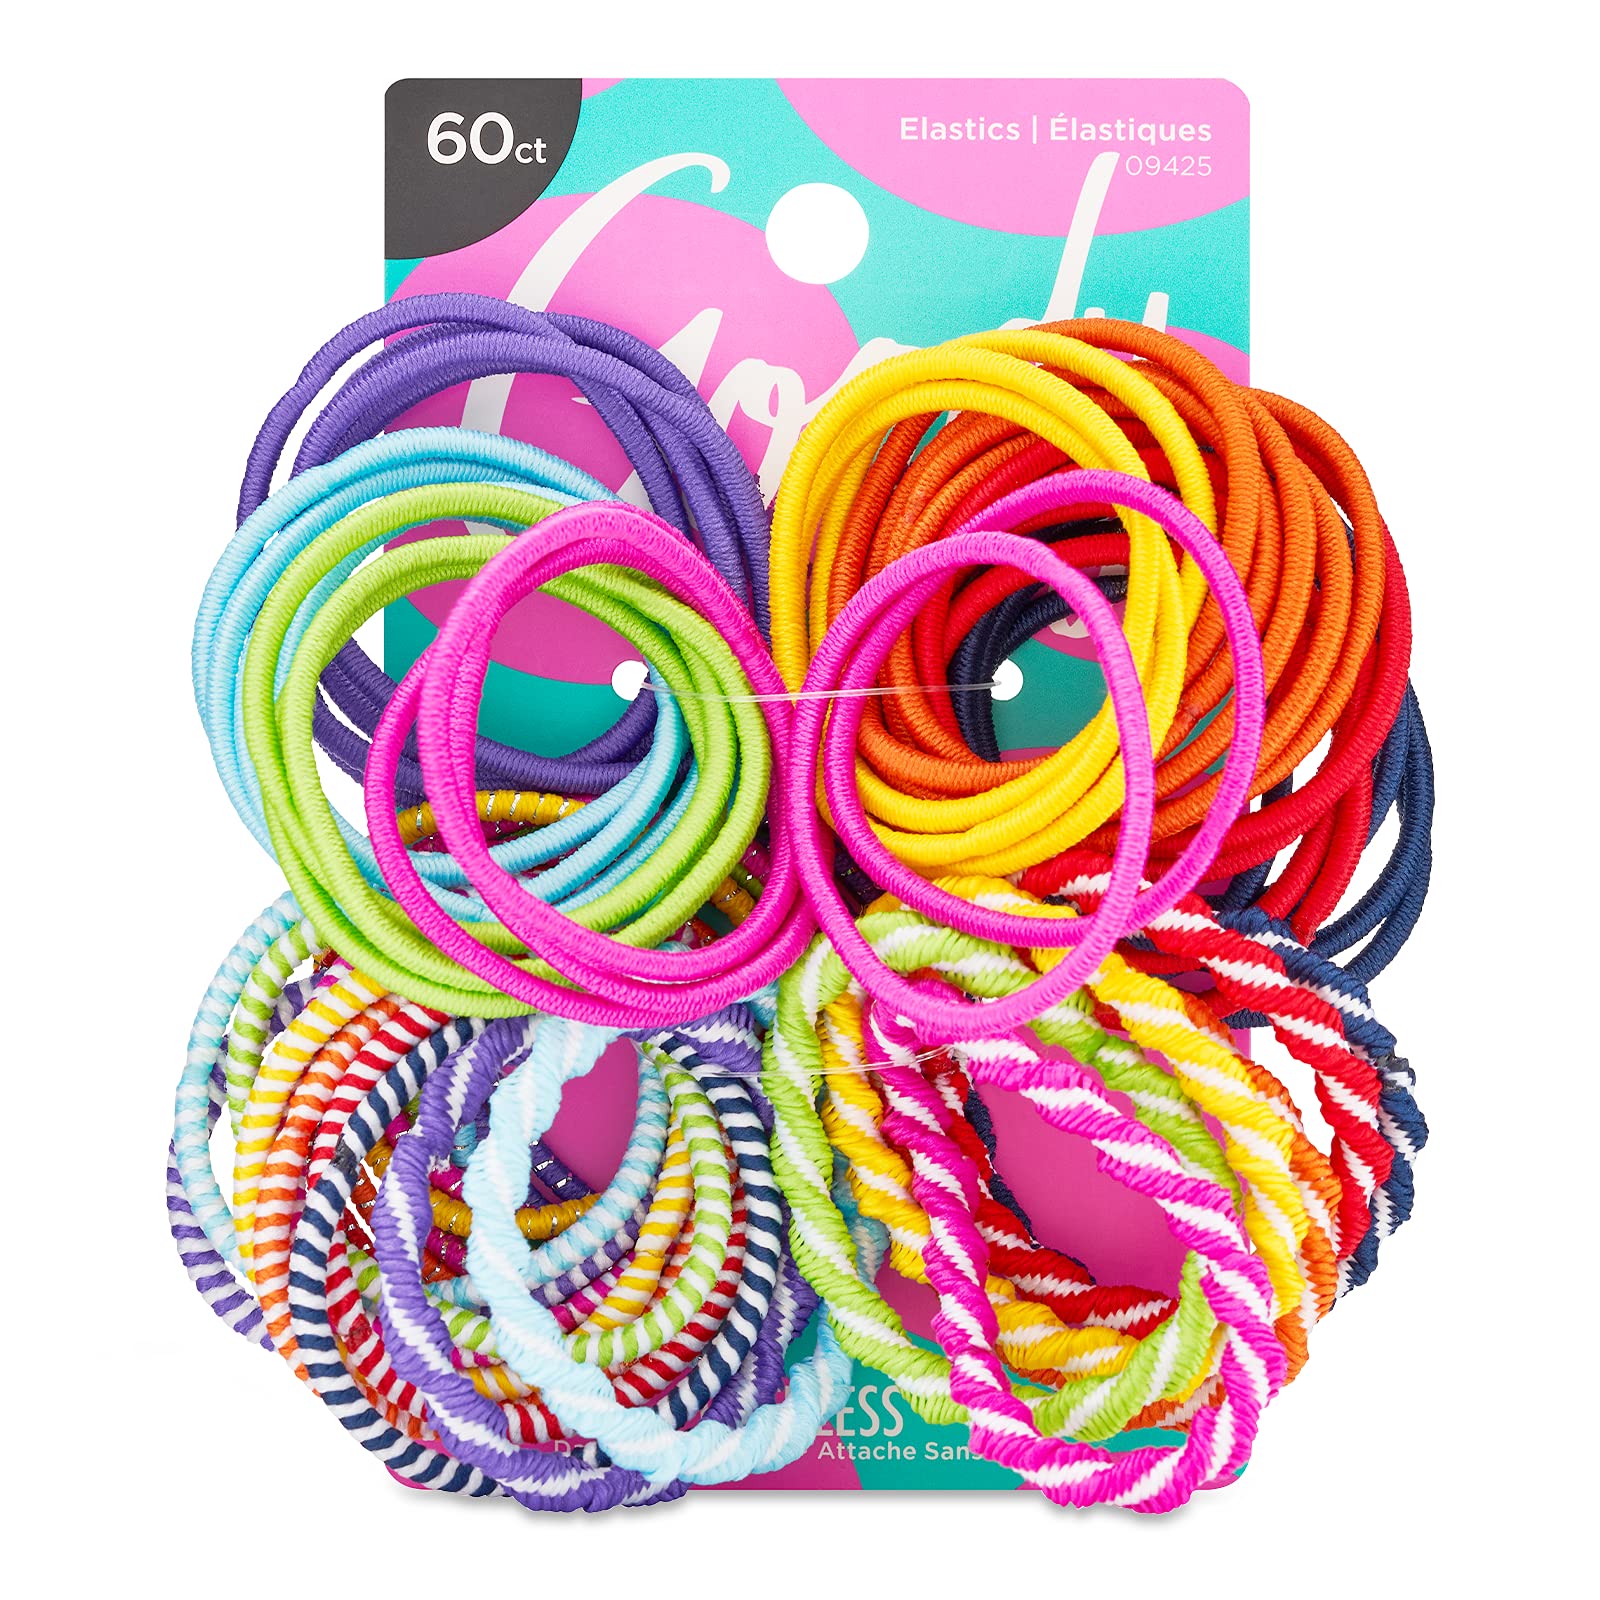 Goody Ouchless Elastic Hair Ties In Brights and Pastels - Perfect for Fine, Curly Hair and Sensitive Scalps - Pain Free Hair Accessories for Men, Women, Girls and Boys, Assorted ,60 Count(Pack of 1)